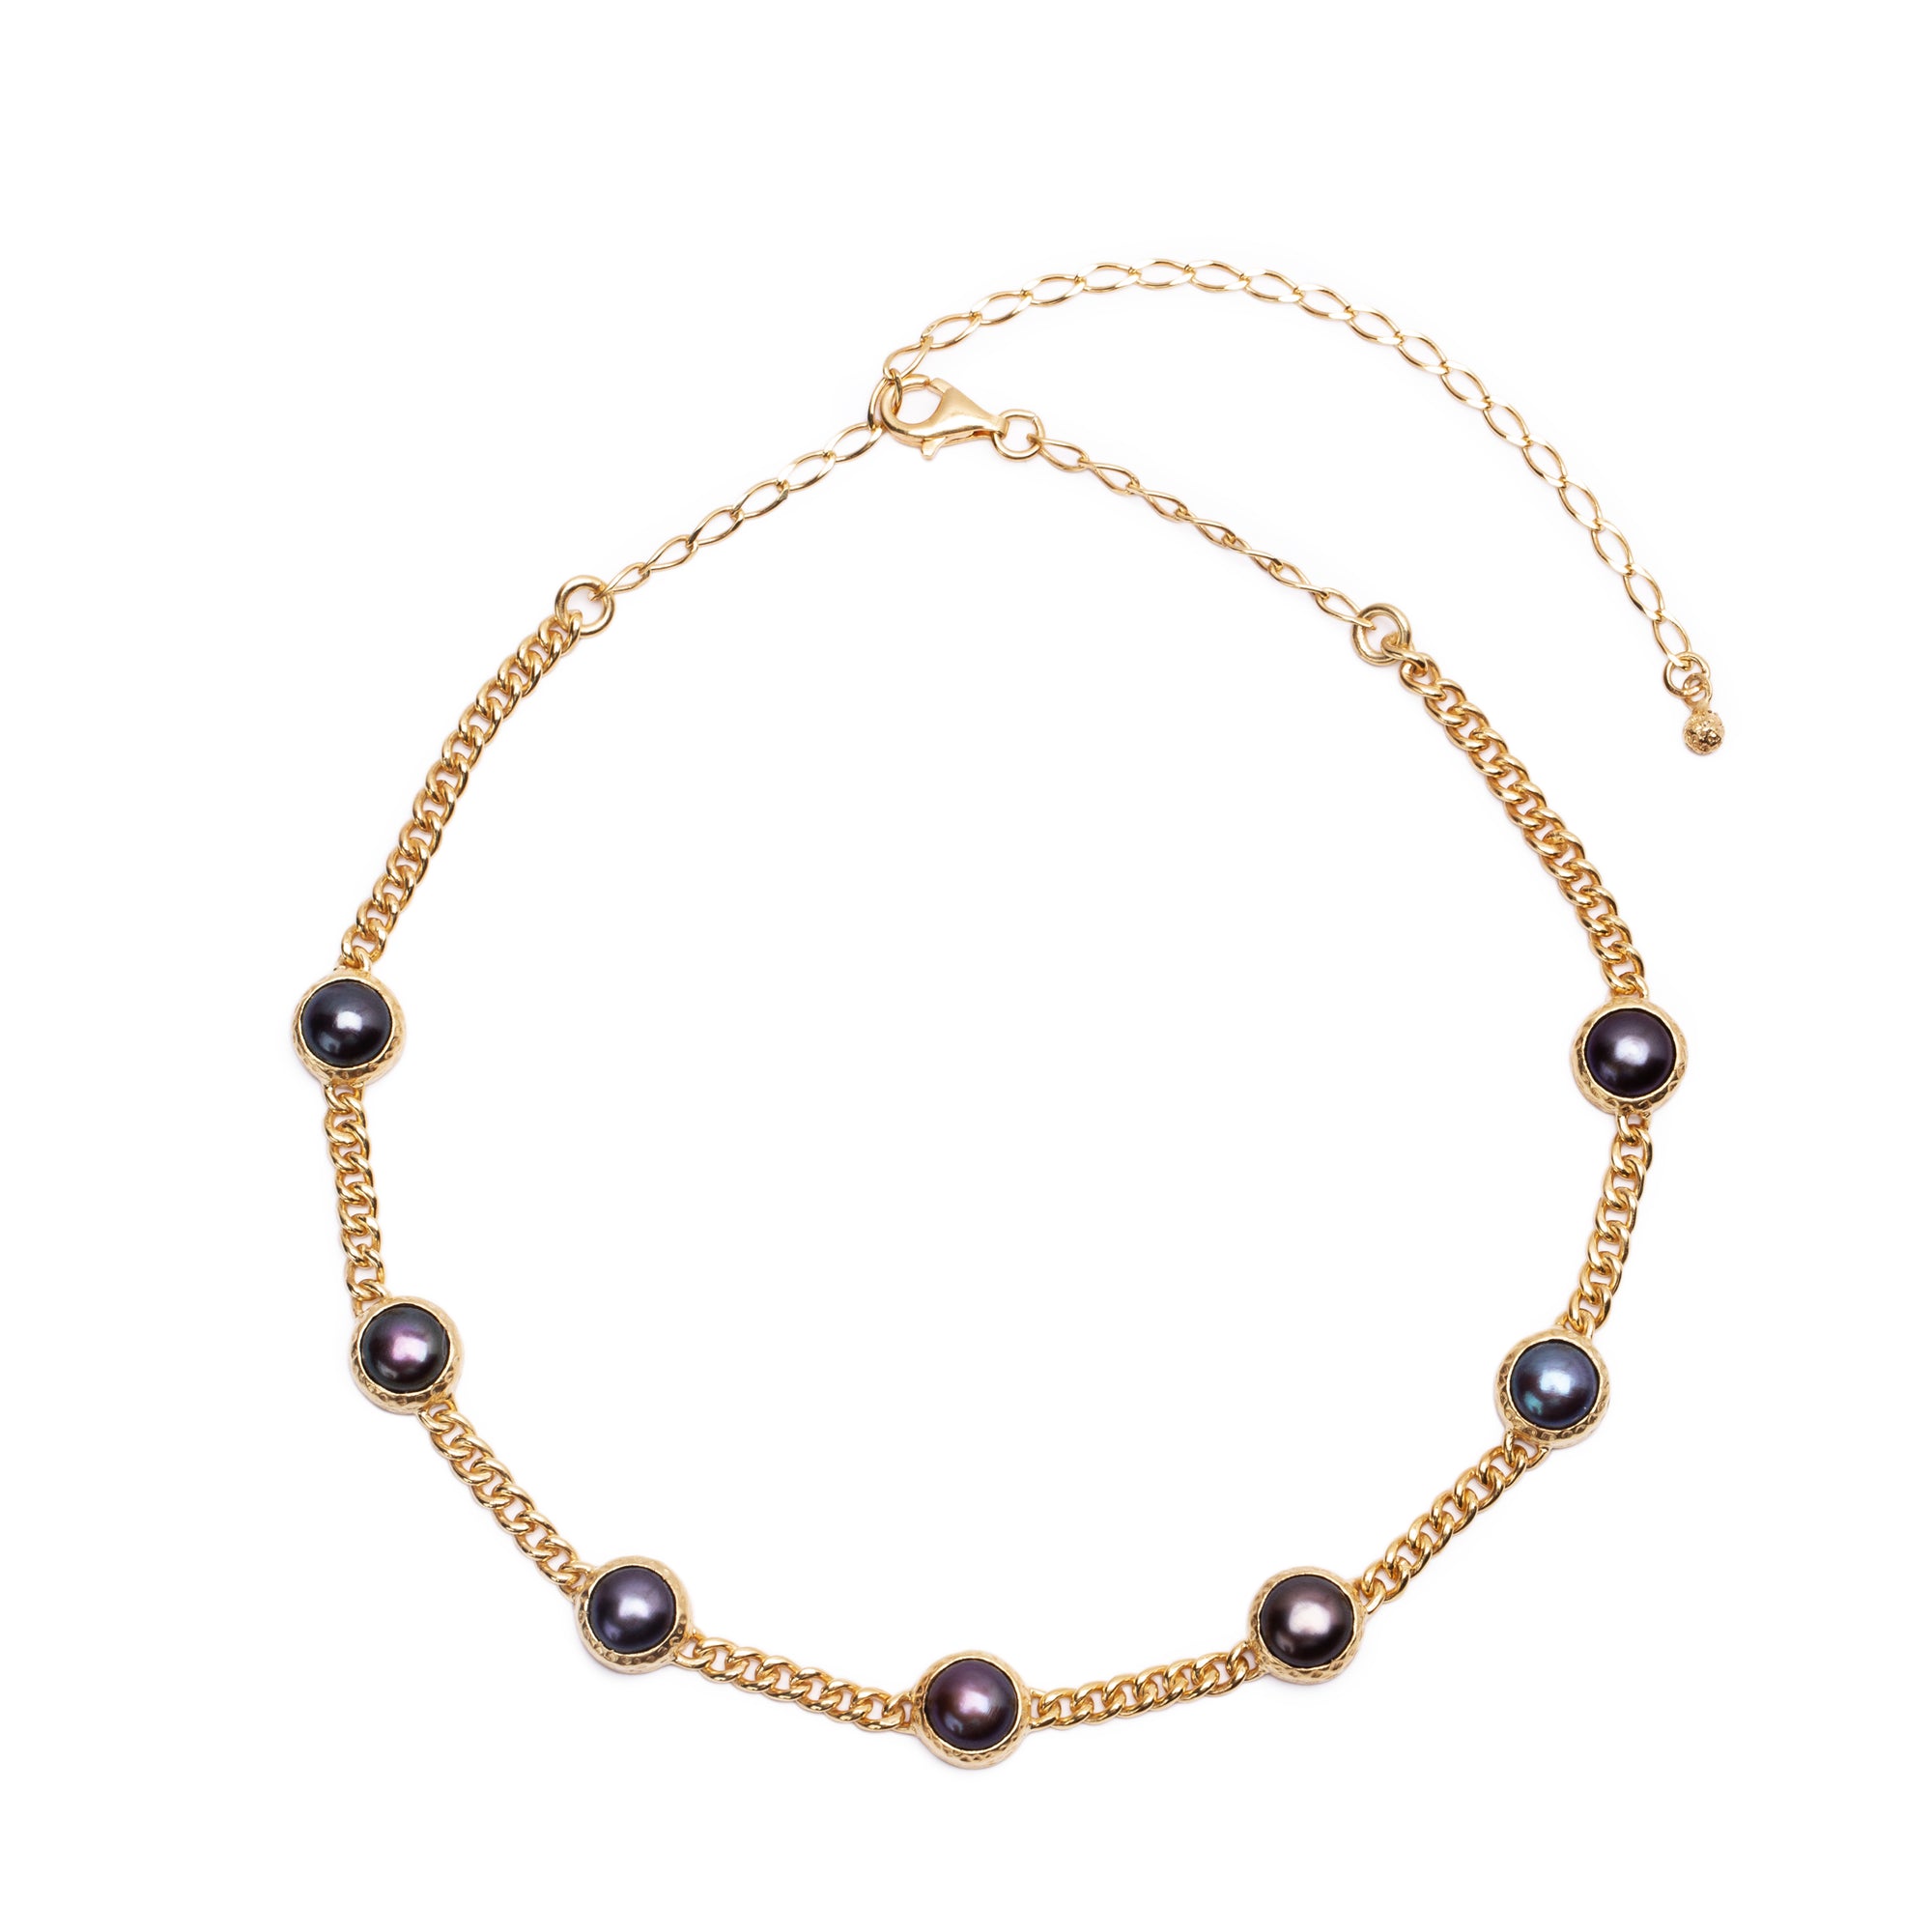 The POEM Choker Black Pearls Gold Plated